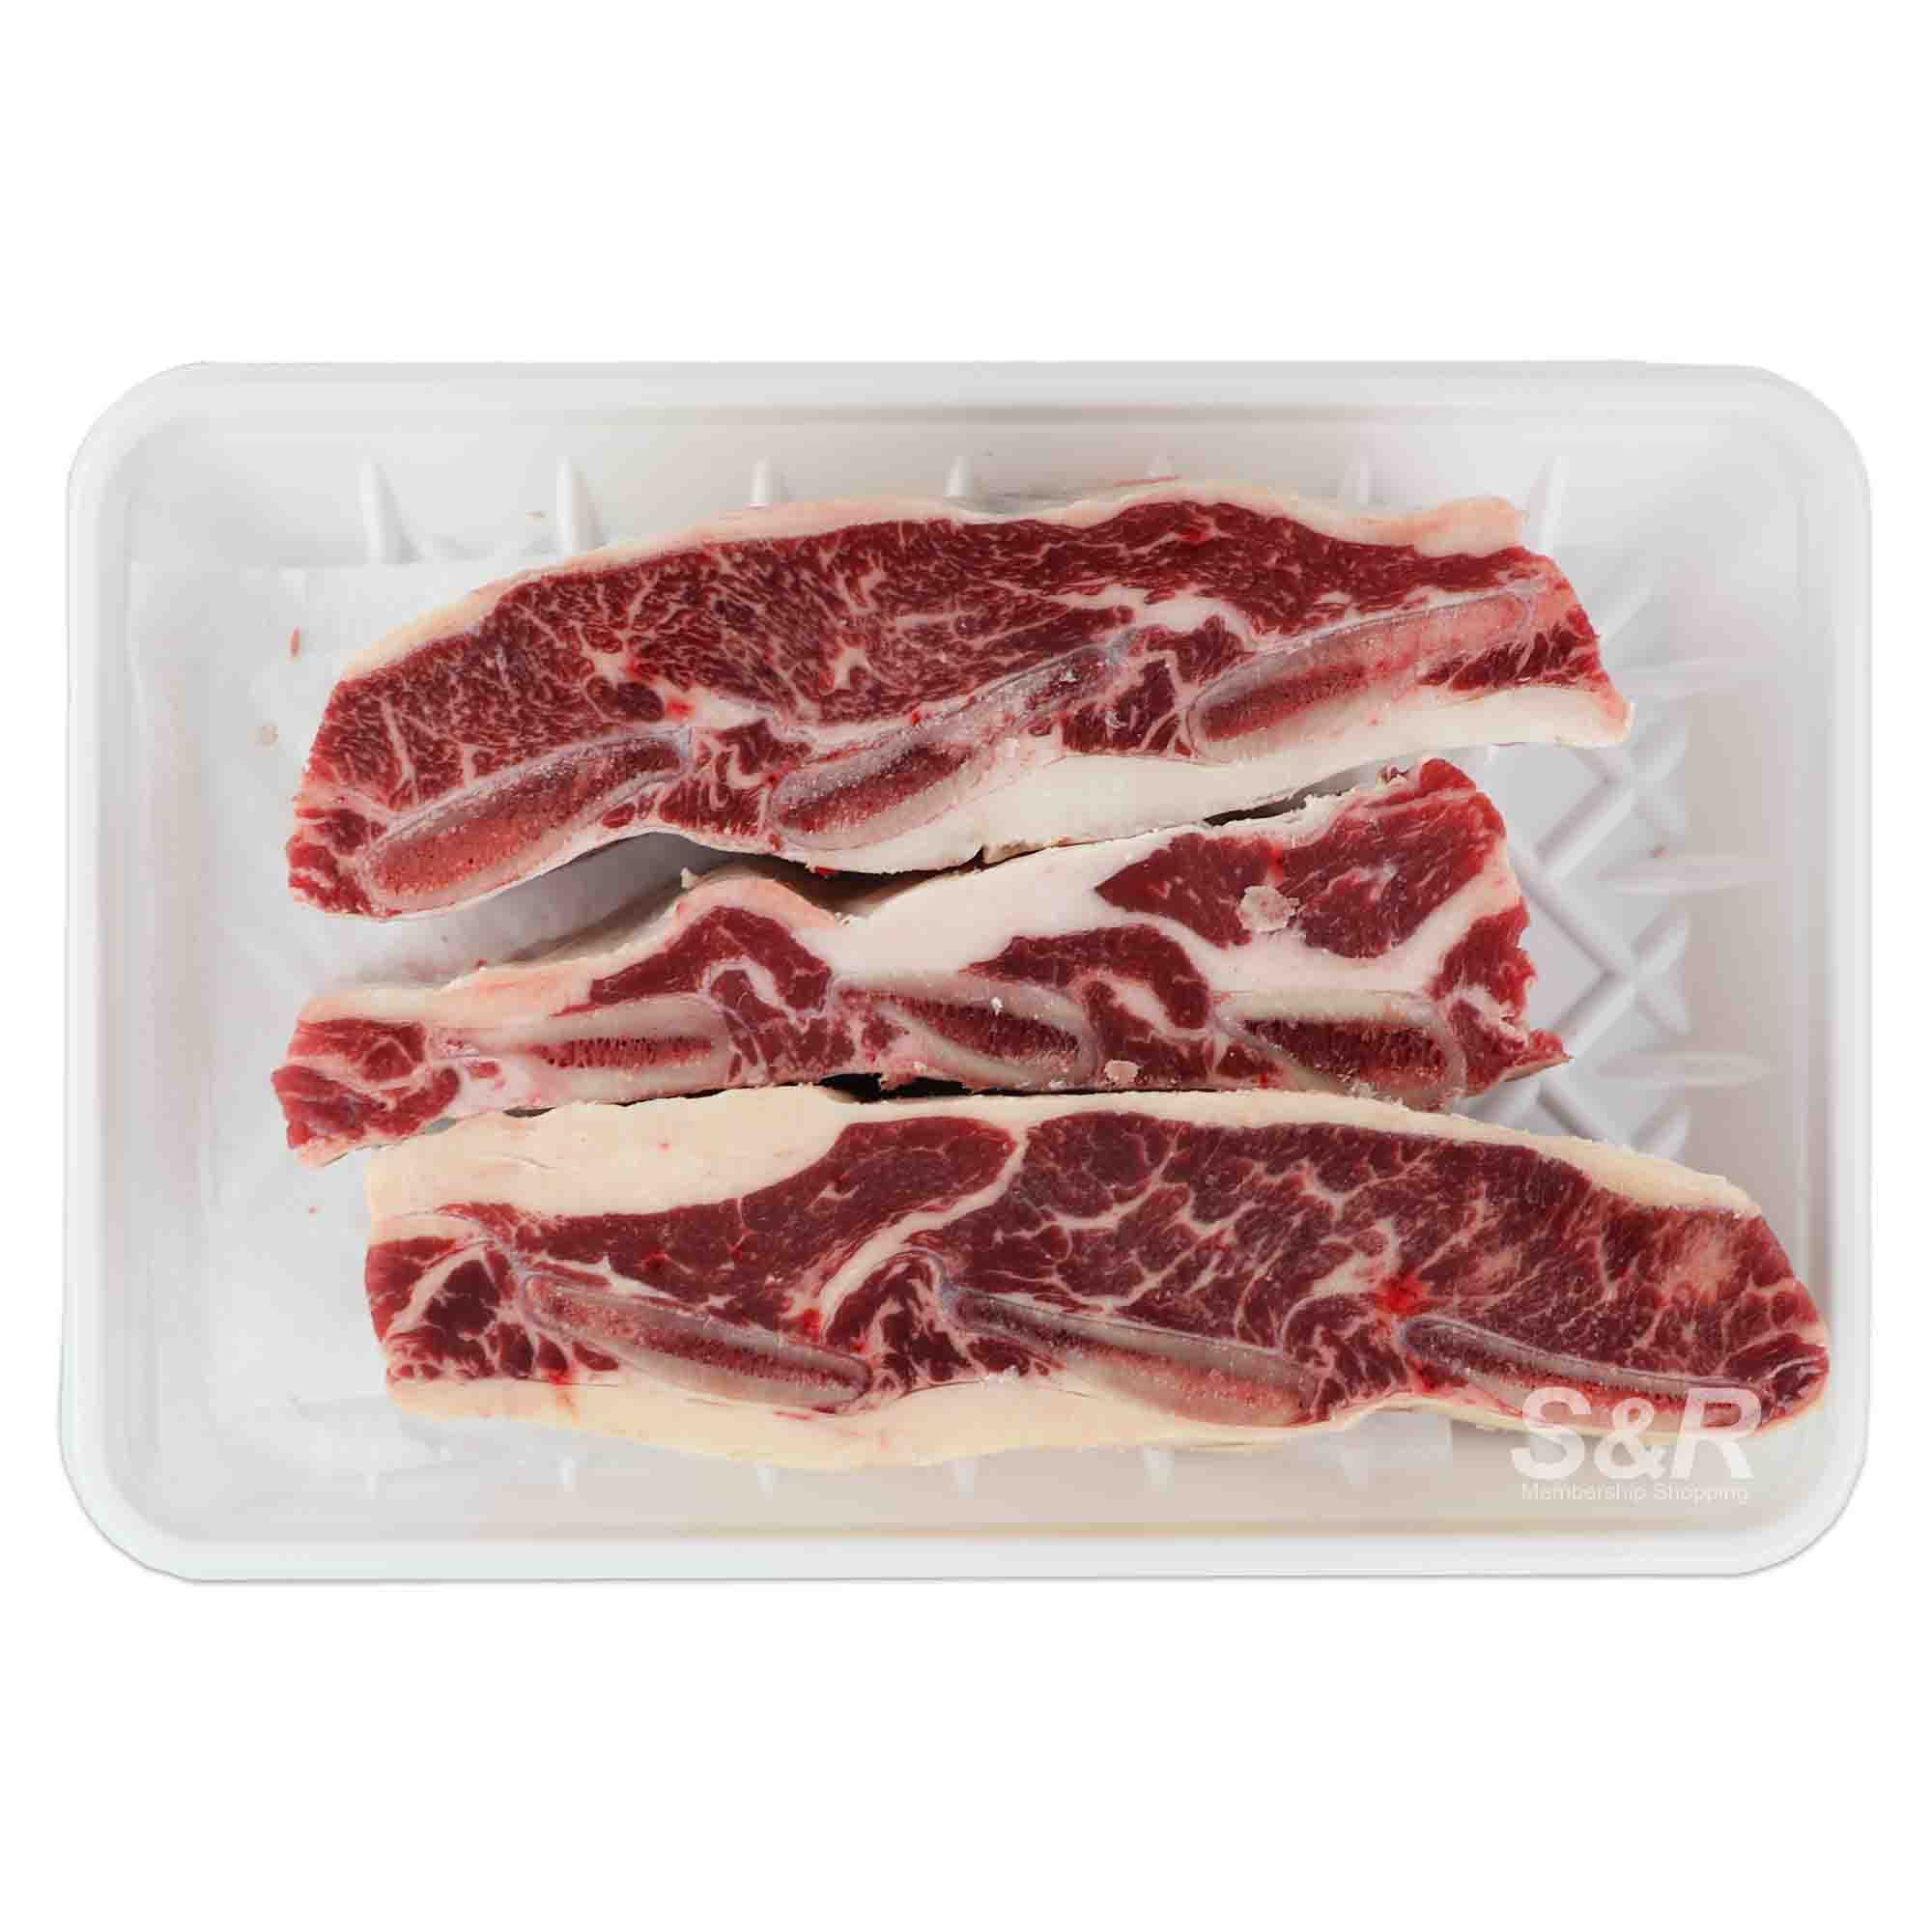 Members' Value Beef Short Ribs approx. 2kg